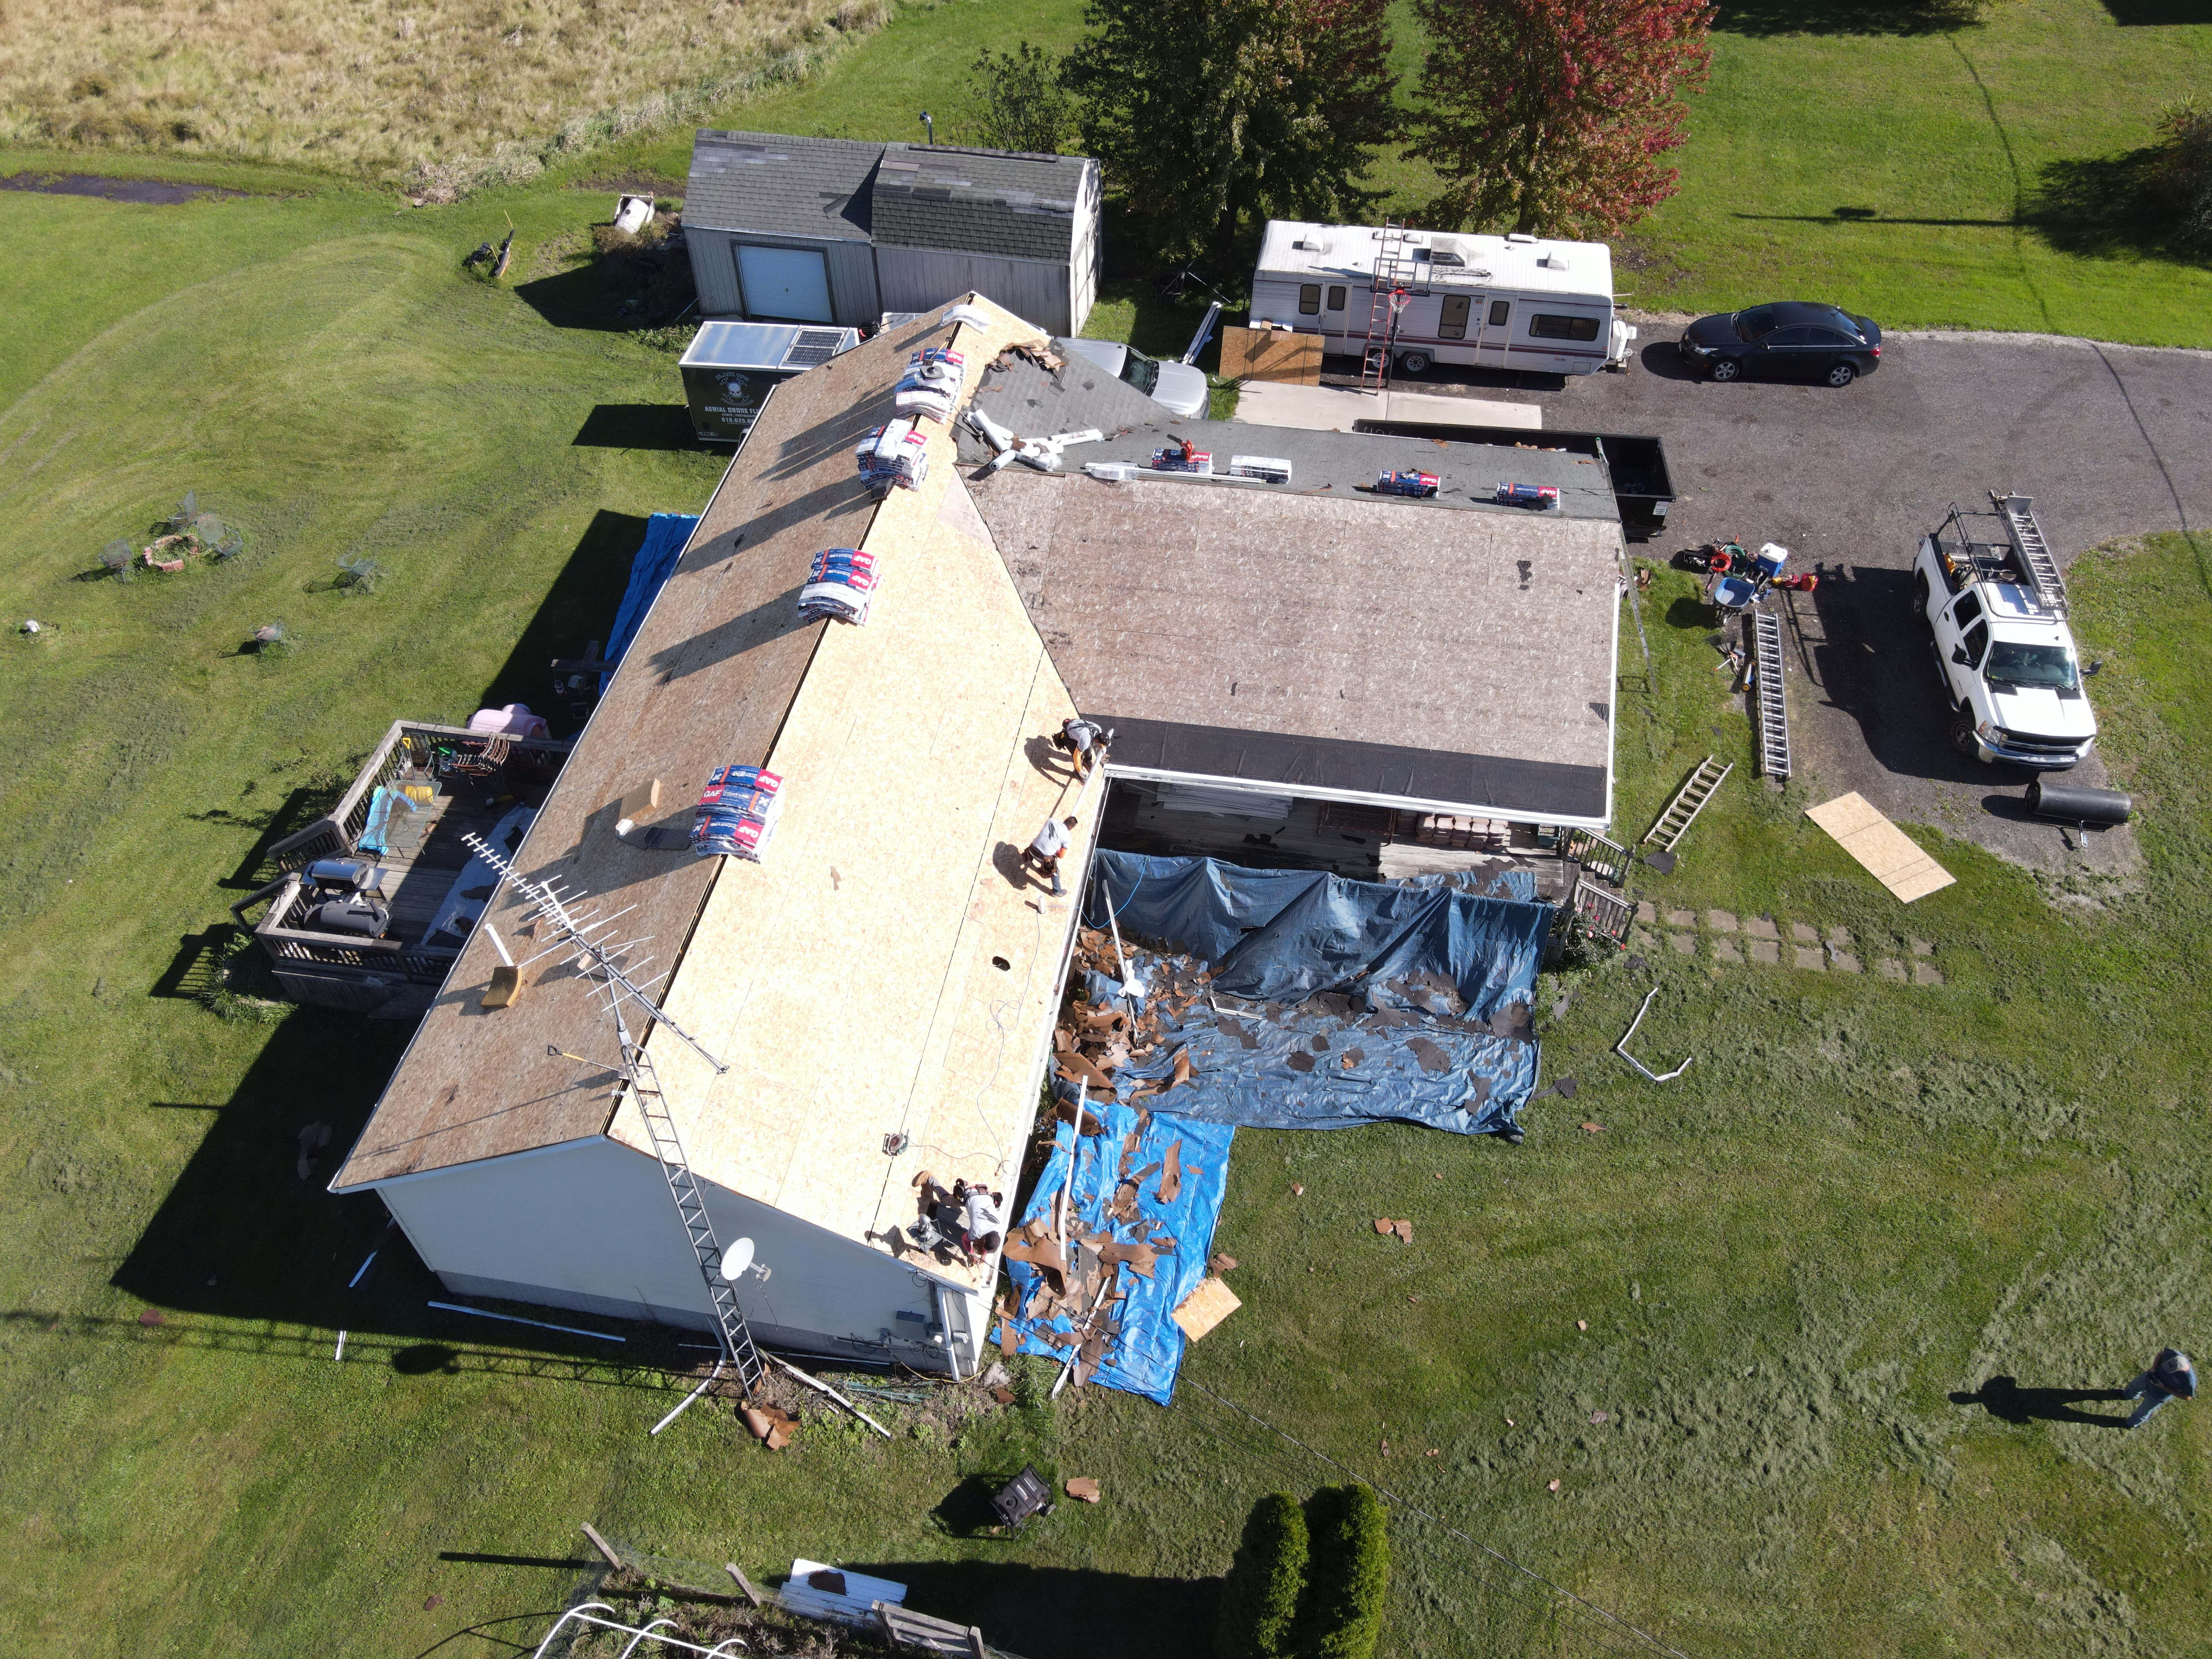 Roofing Above All - Ridgecon Construction, Inc. - Shelby Township, MI, US, rubber roof installation